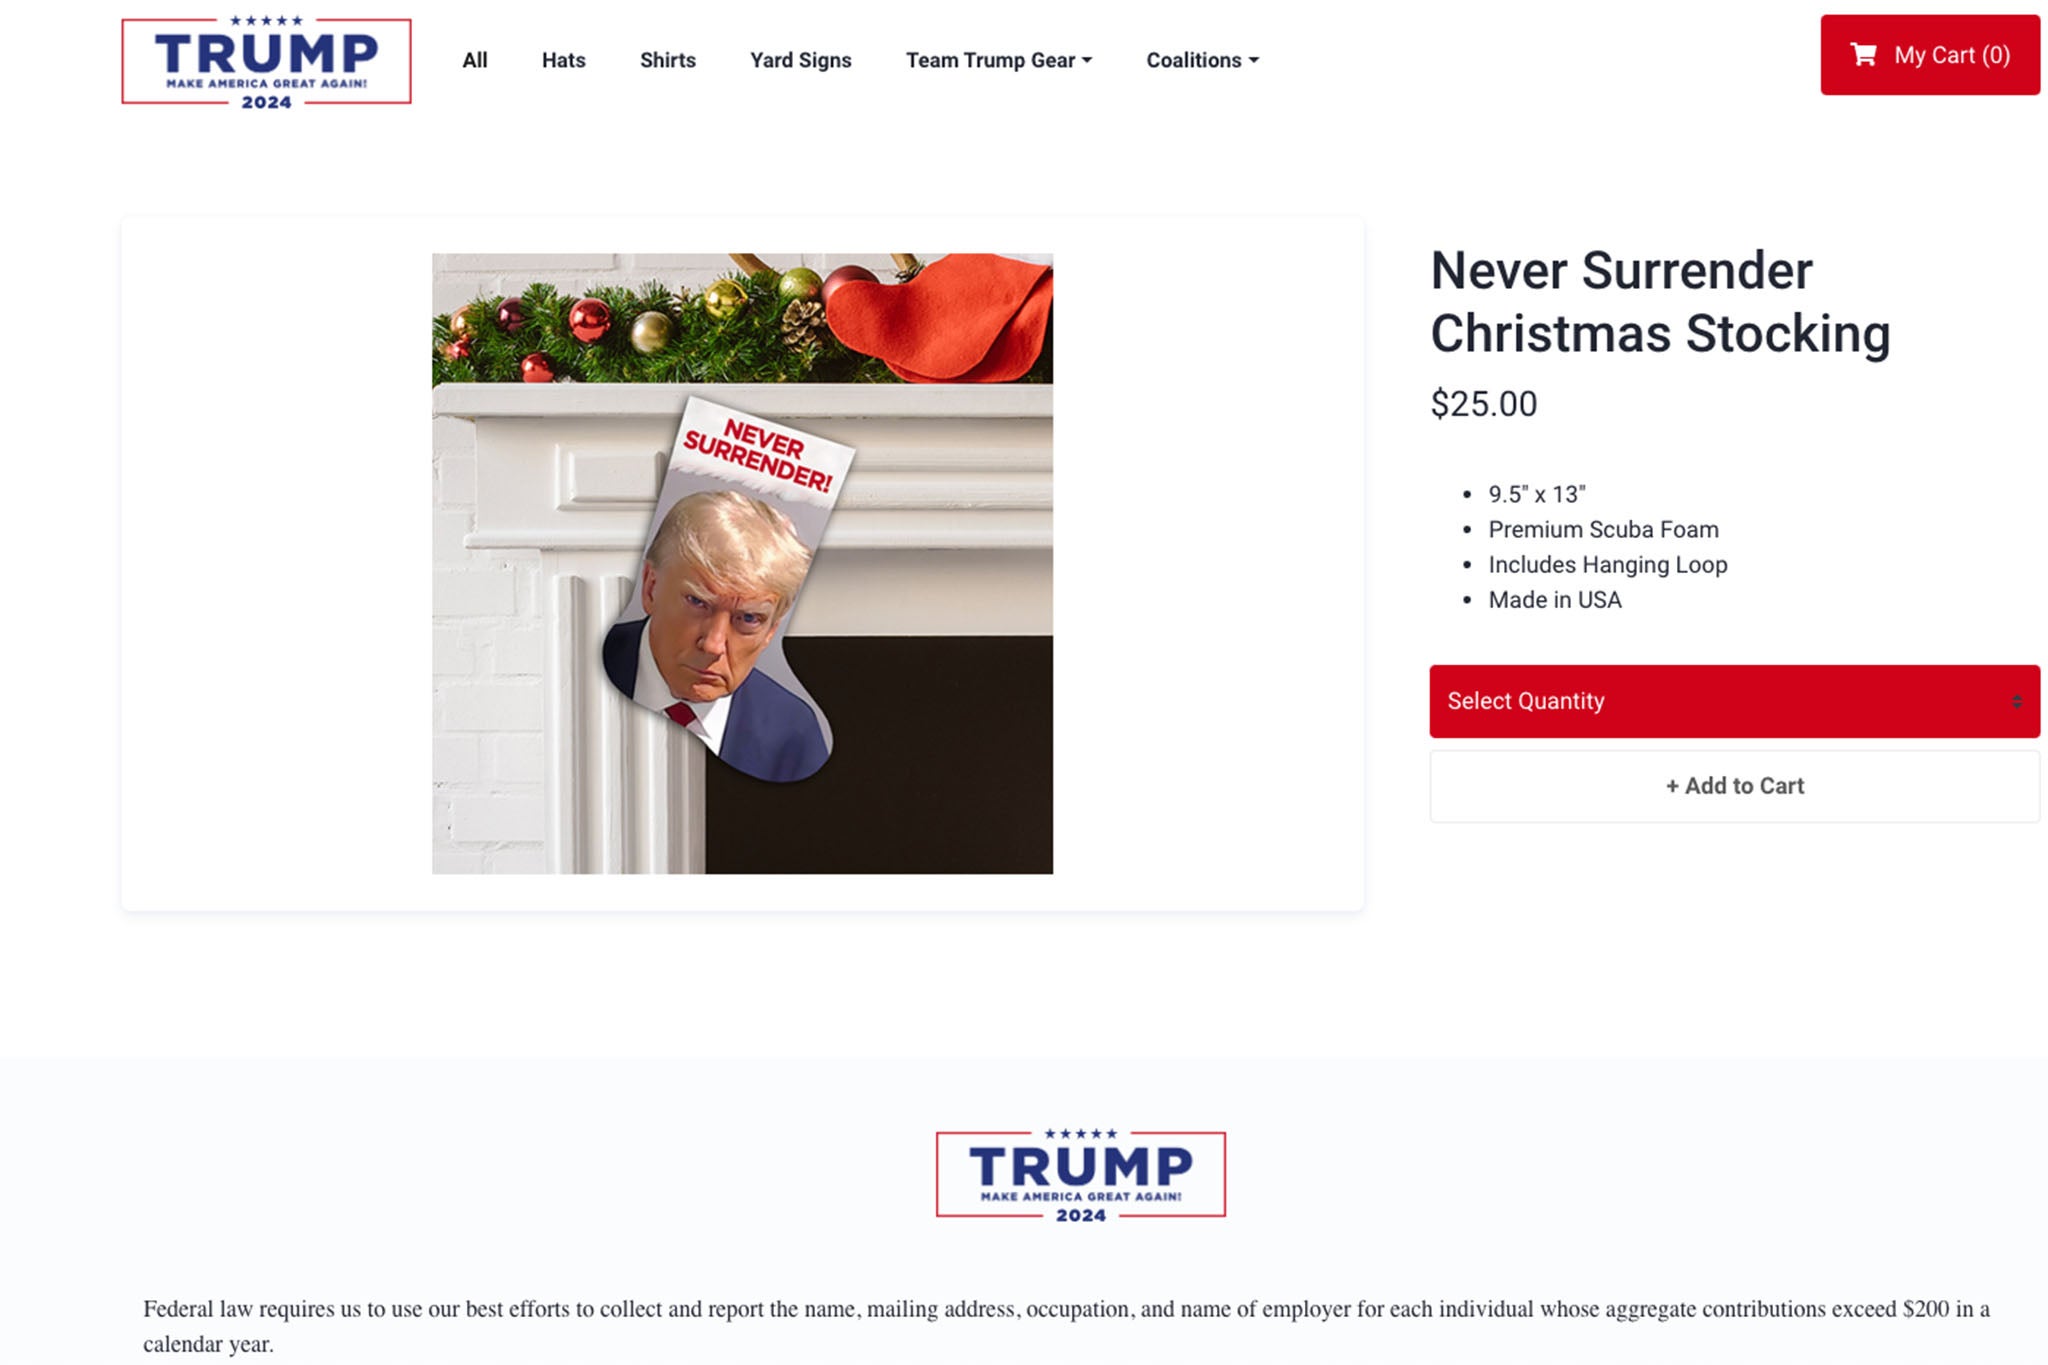 A screenshot of the official Donald Trump merchandising site of a Never Surrender Christmas Stocking with his mug shot on it